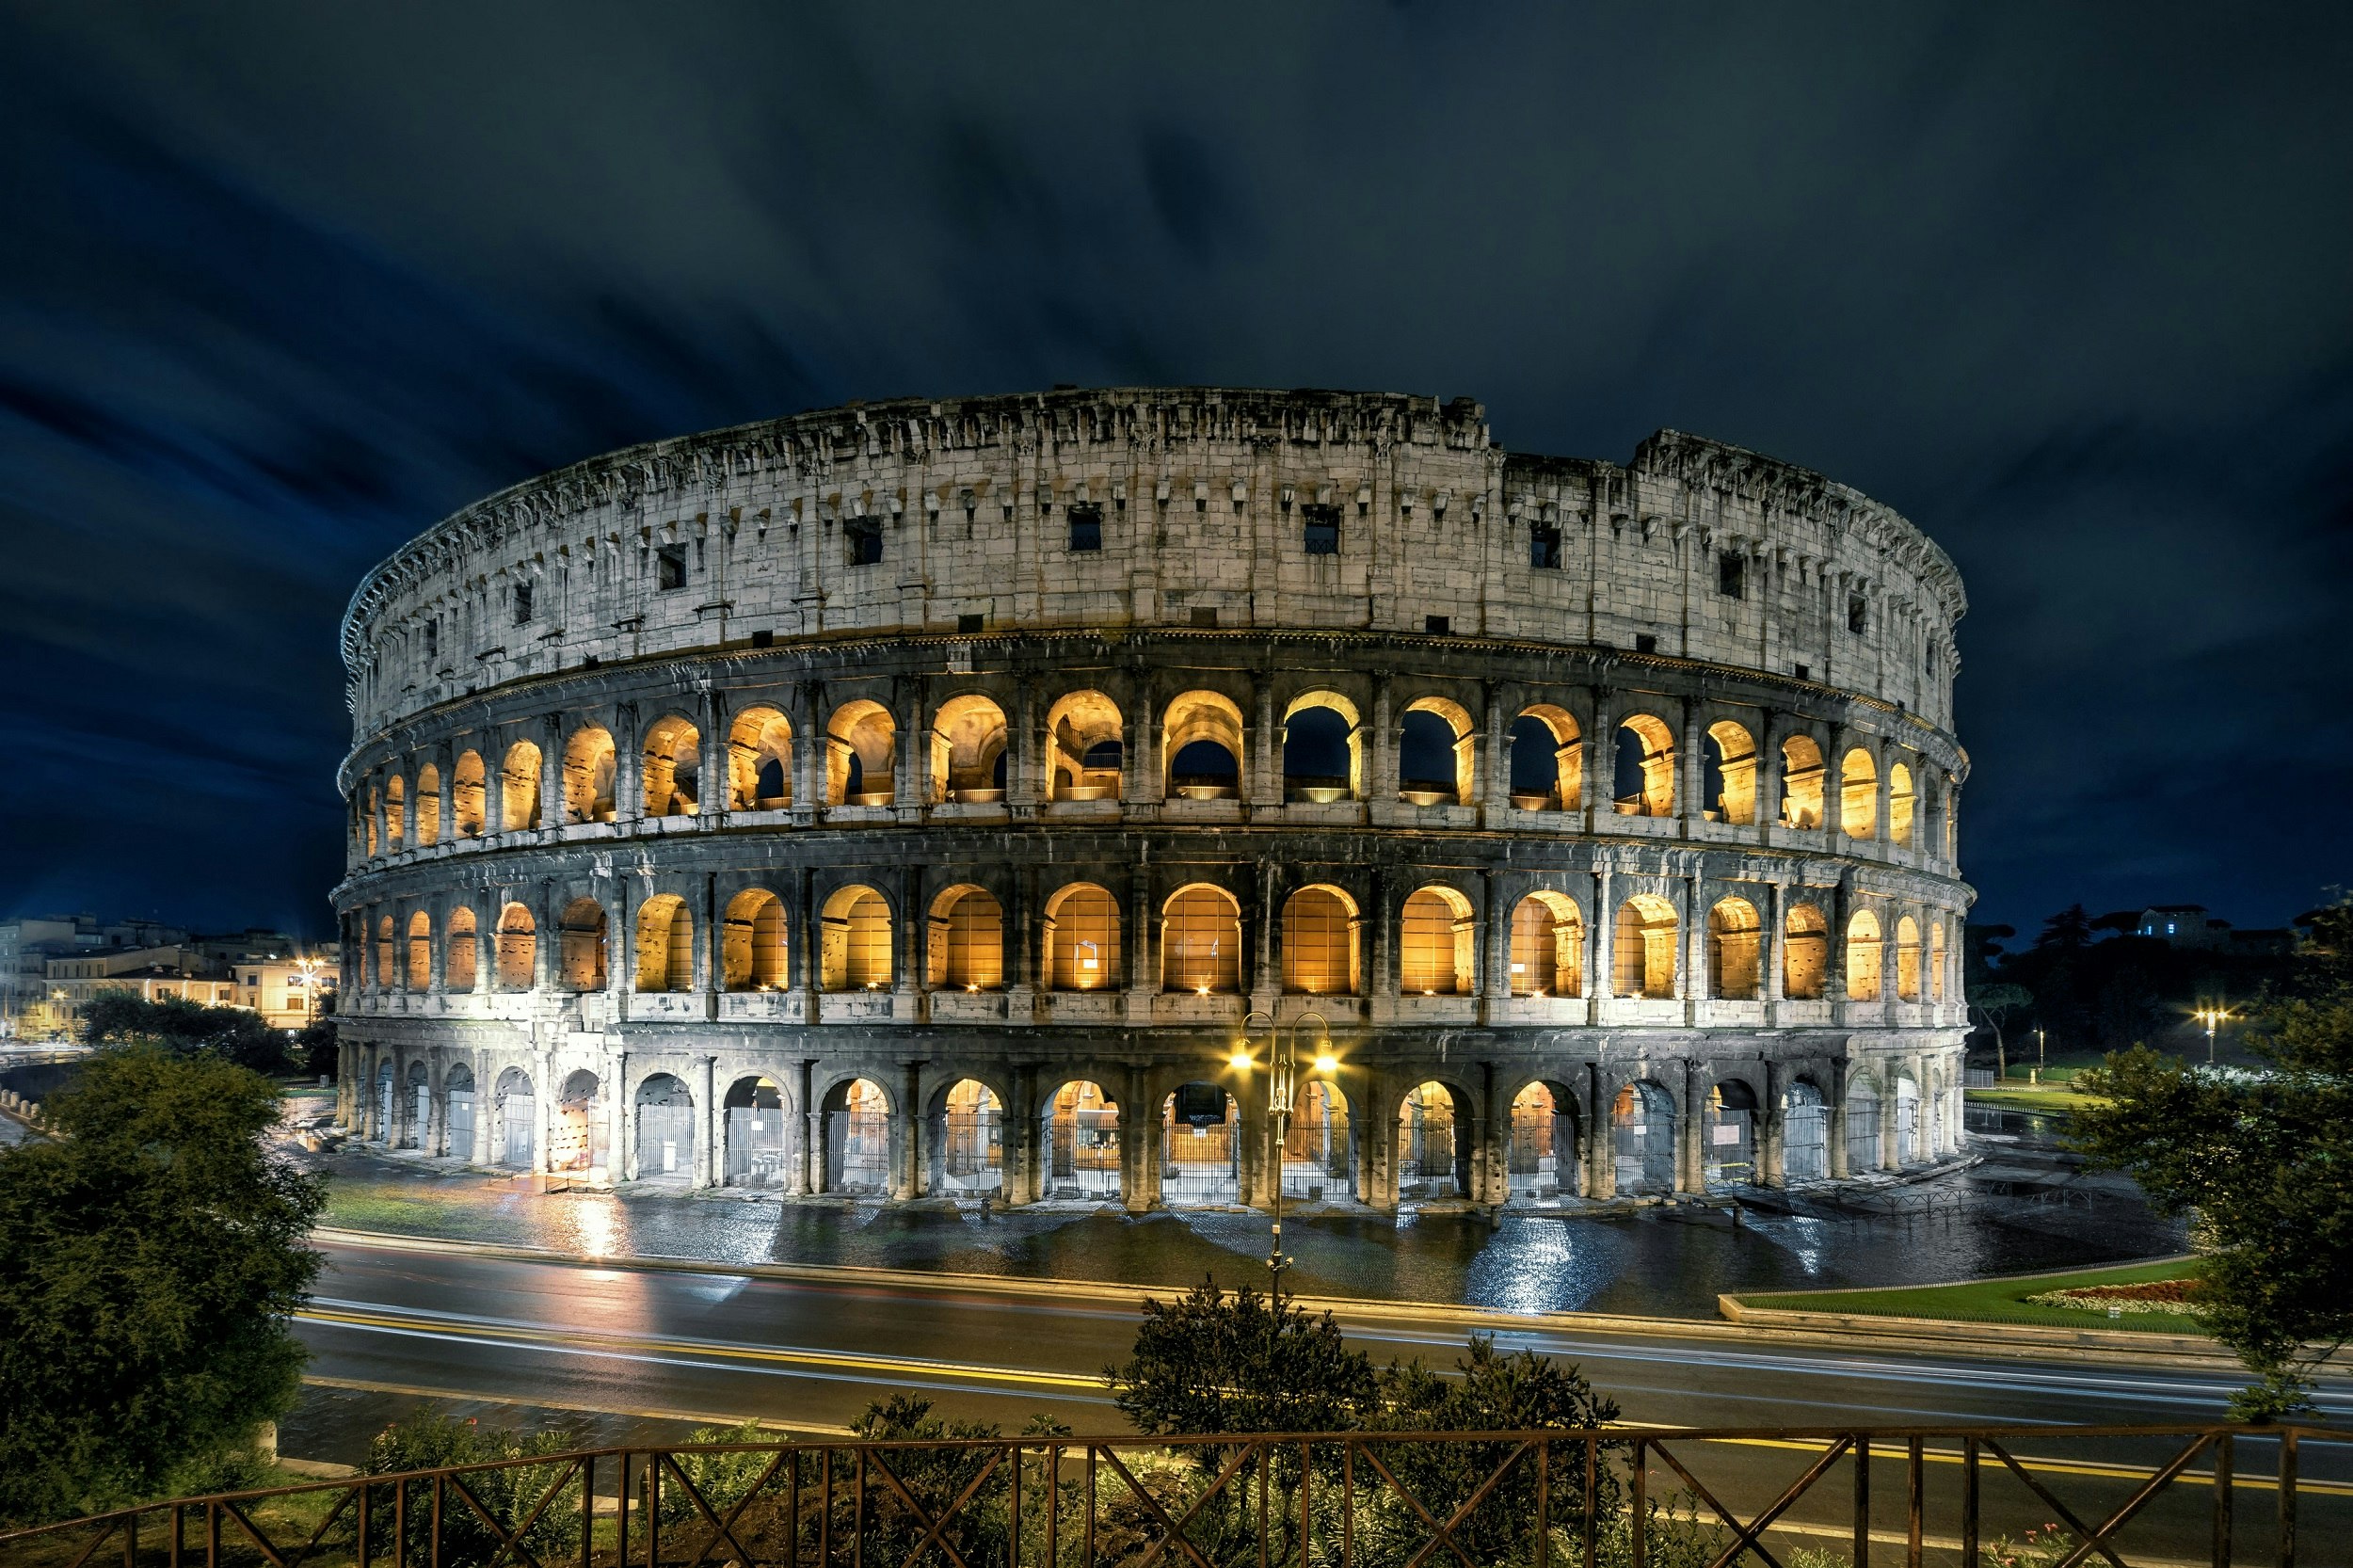 A nighttime shot of the Colosseum, which is a large, multi-storey round building with many arches. Each arch is lit up.